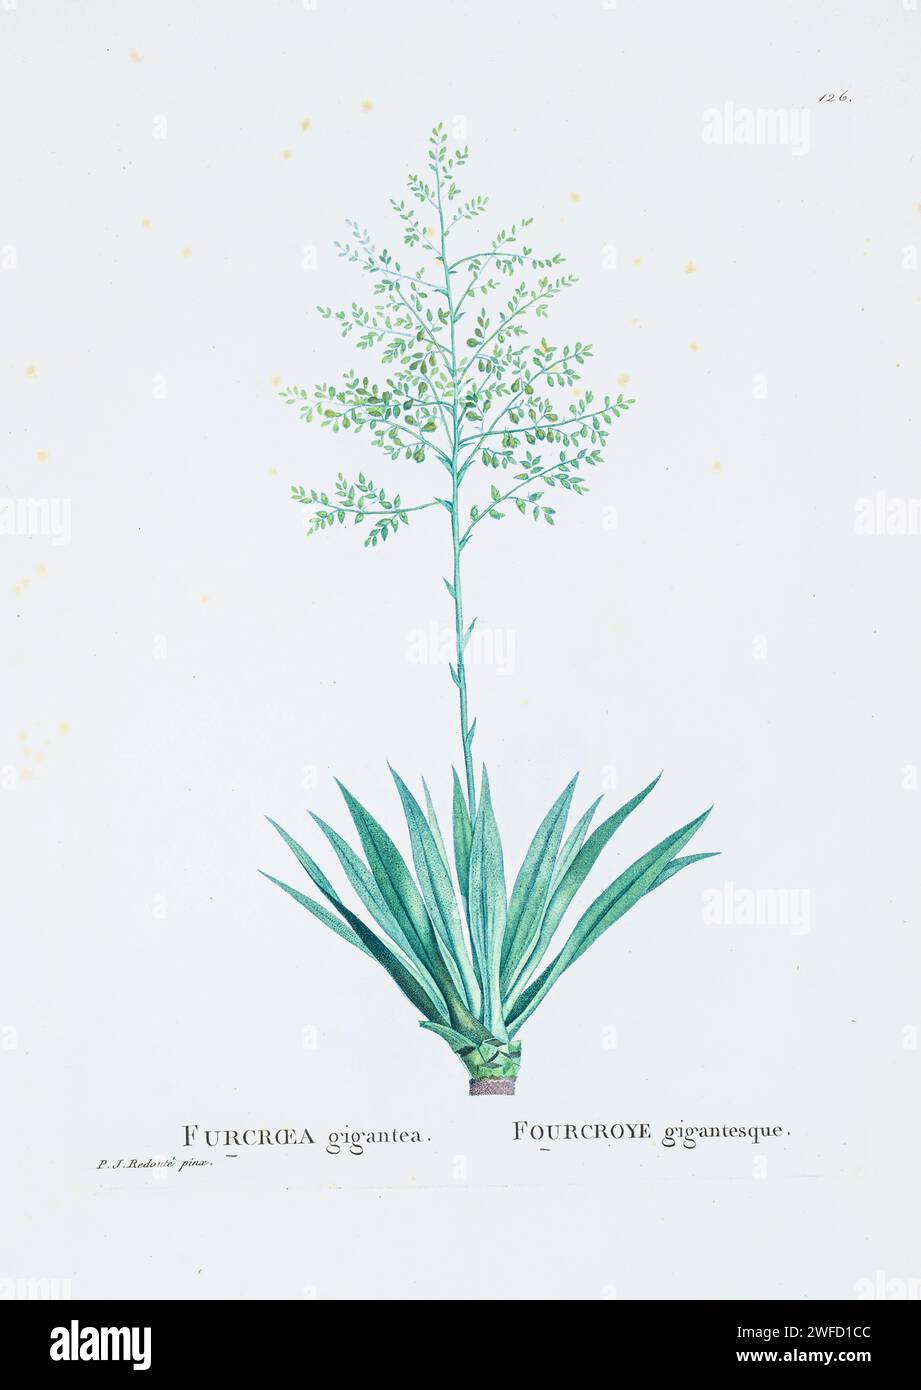 Furcraea cubensis Vent. inermis Bak. Here As Furcroea gigantea (Agave foetida) from History of Succulent Plants [Plantarum historia succulentarum / Histoire des plantes grasses] painted by Pierre-Joseph Redouté and described by Augustin Pyramus de Candolle 1799 Furcraea is a genus of succulent plants belonging to the family Asparagaceae, native to tropical regions of Mexico, the Caribbean, Central America and northern South America Stock Photo